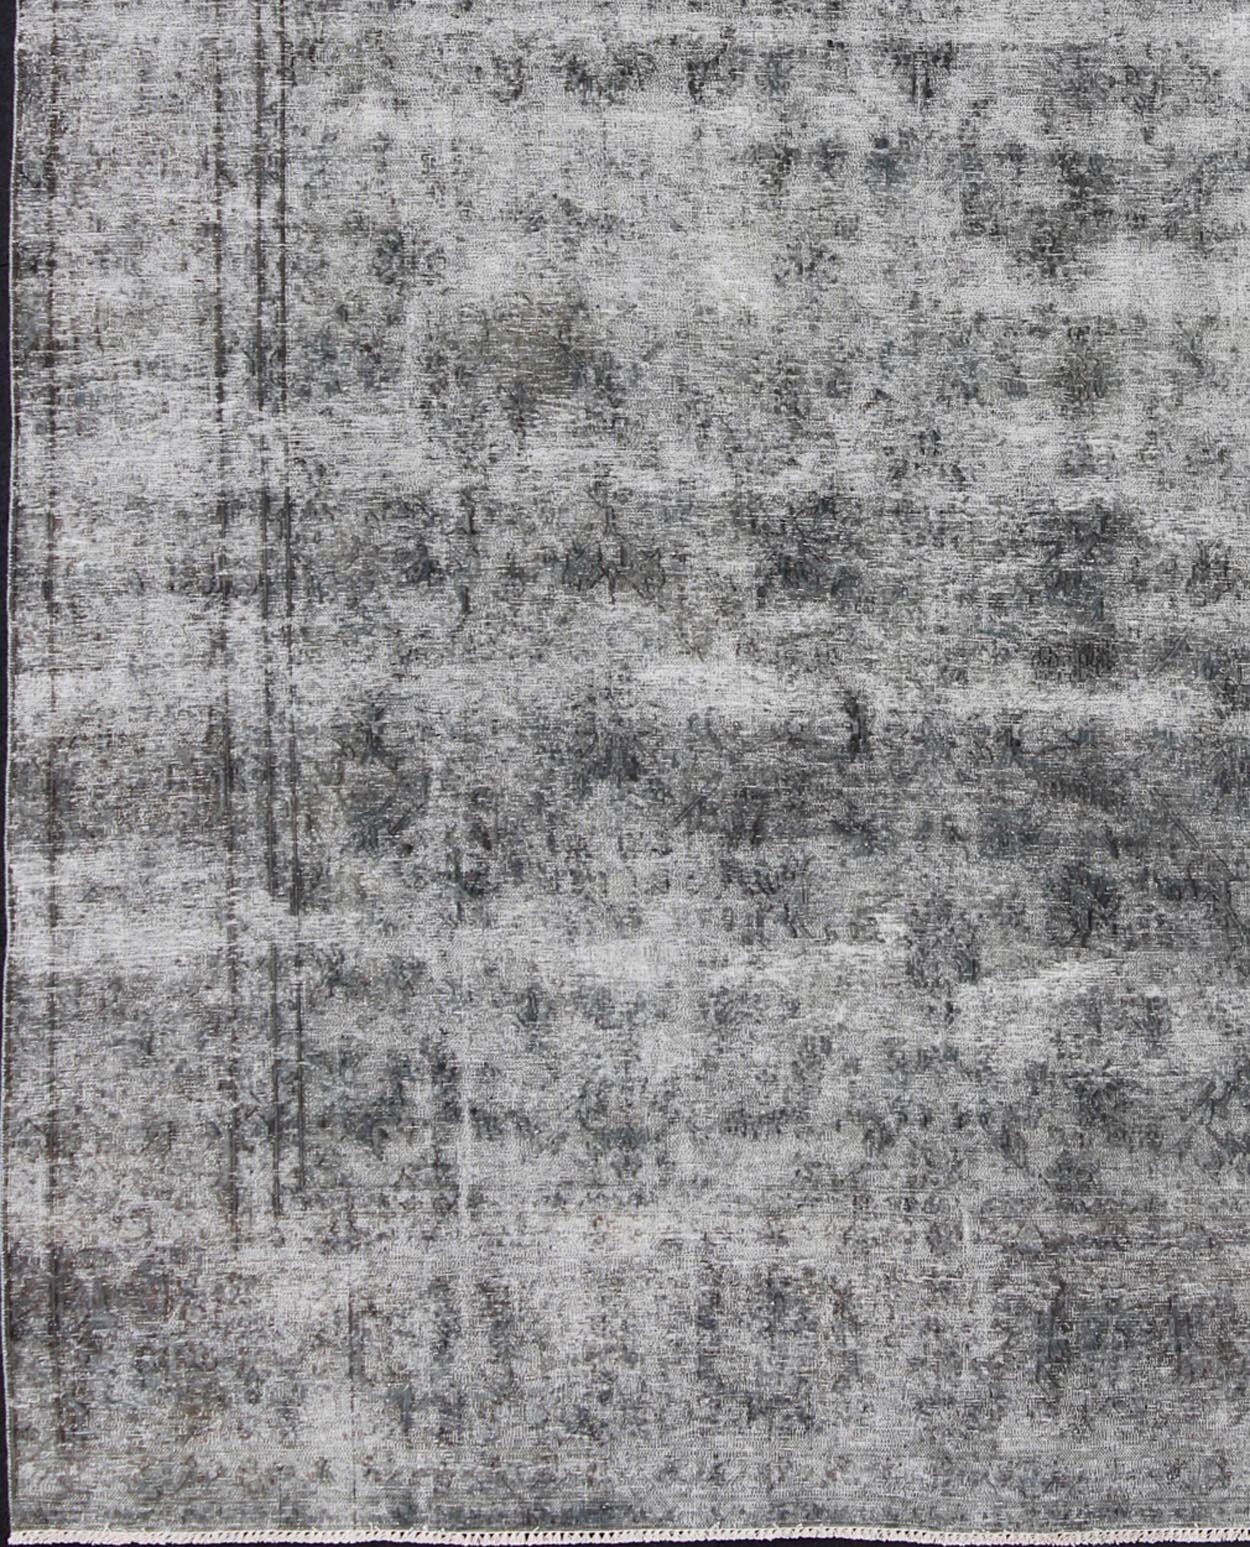 Distressed Persian rug with a modern design in gray background and midnight blue highlights, rug/crv-10046449, distressed Persian rug.
Measures: 9'4 x 12'6.